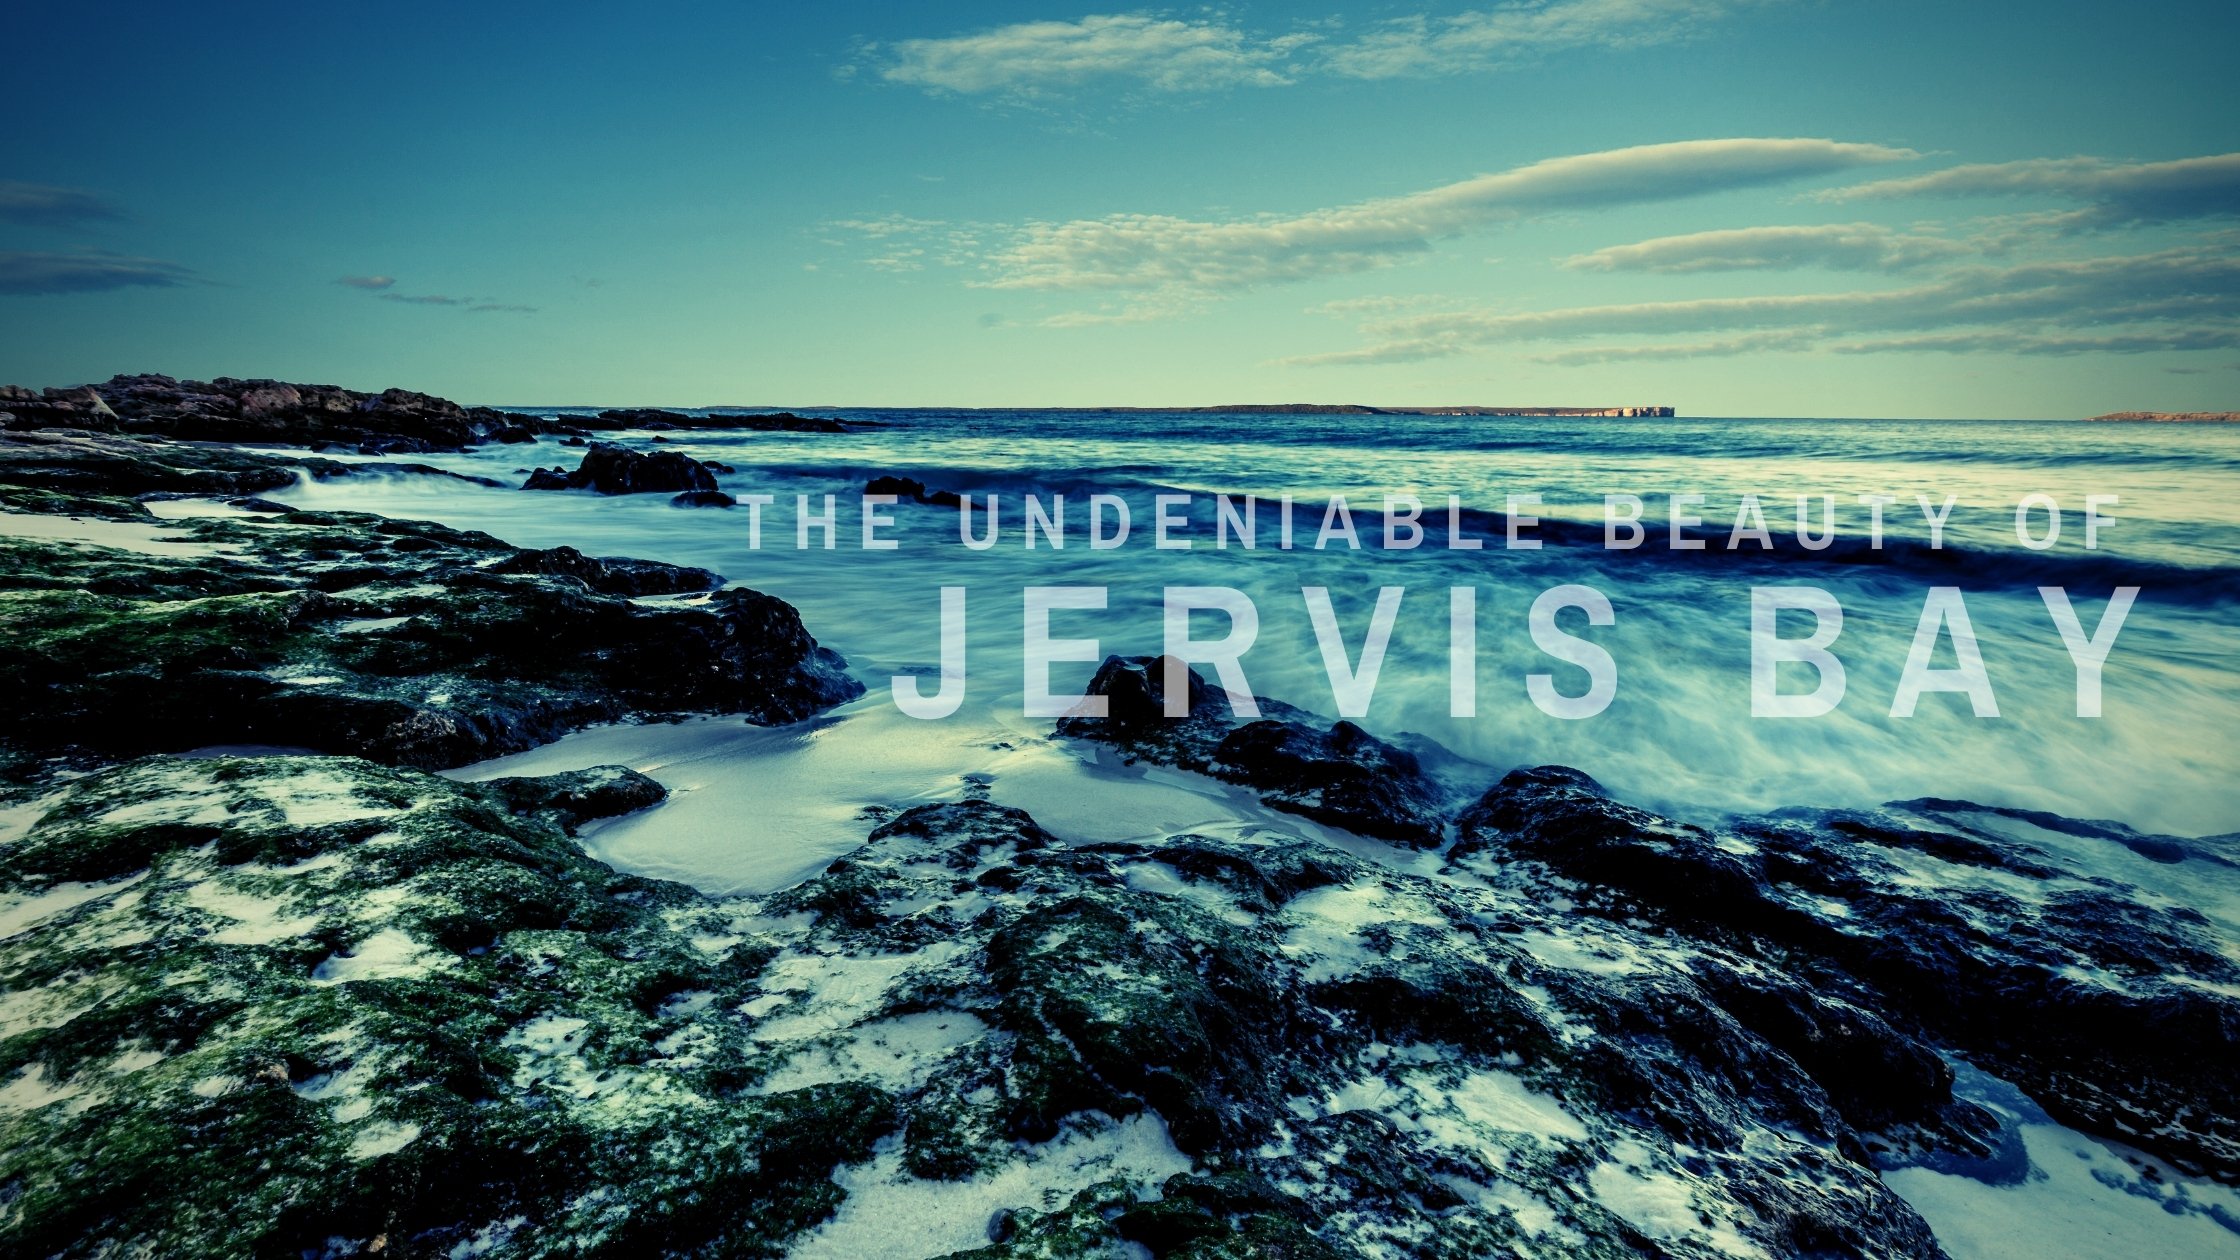 The undeniable beauty of Jervis Bay